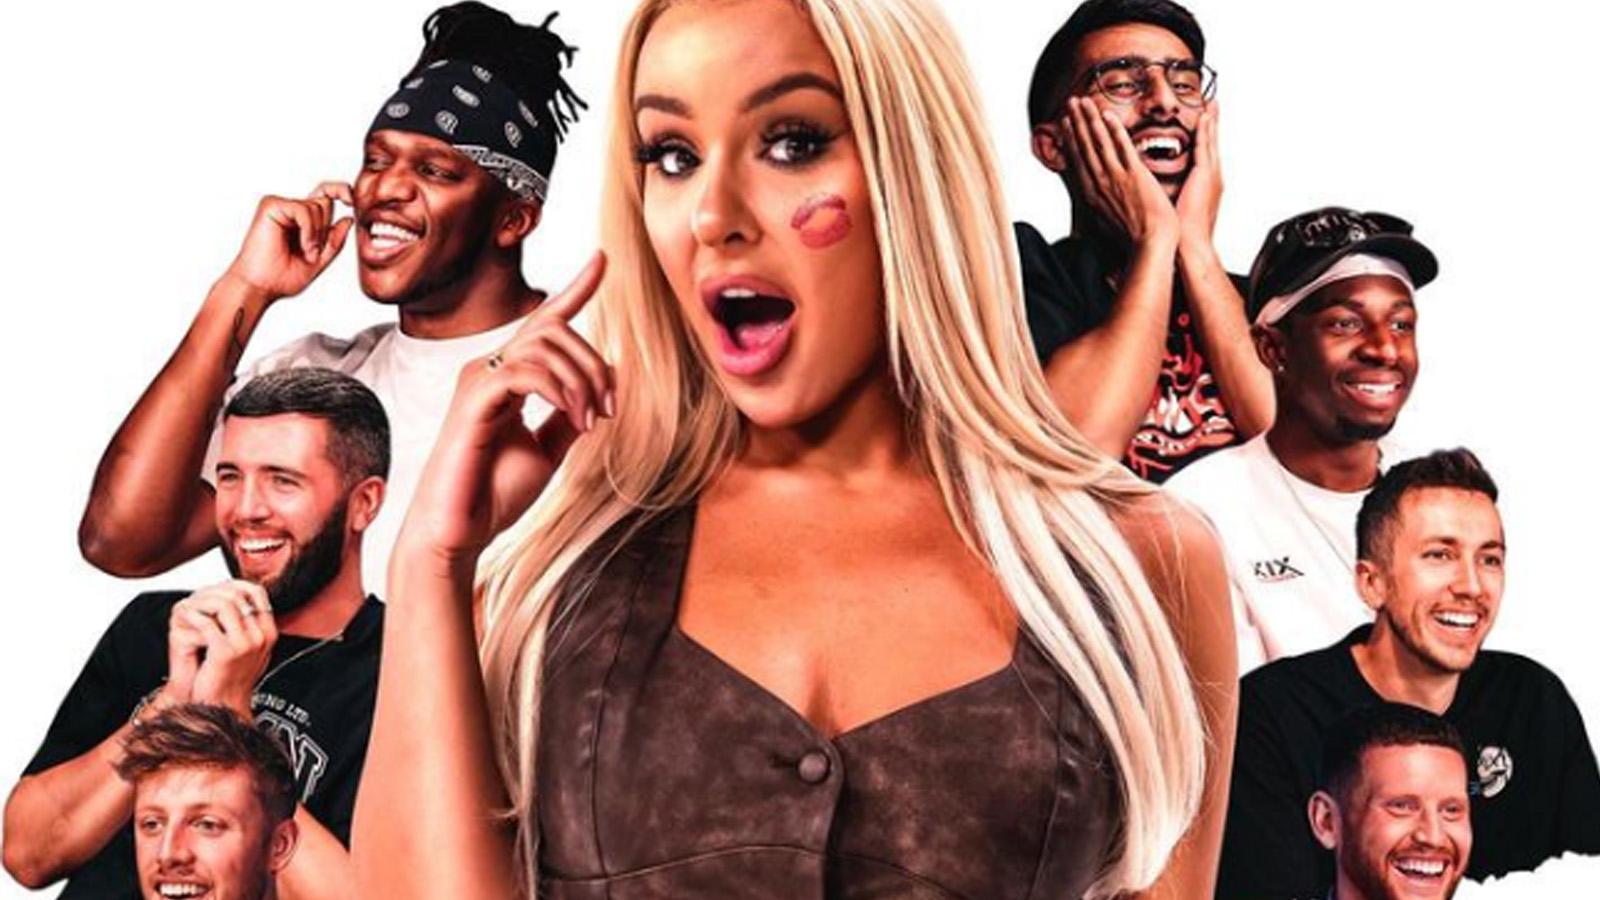 Tana Mongeau responds after Sidemen call her out for prank